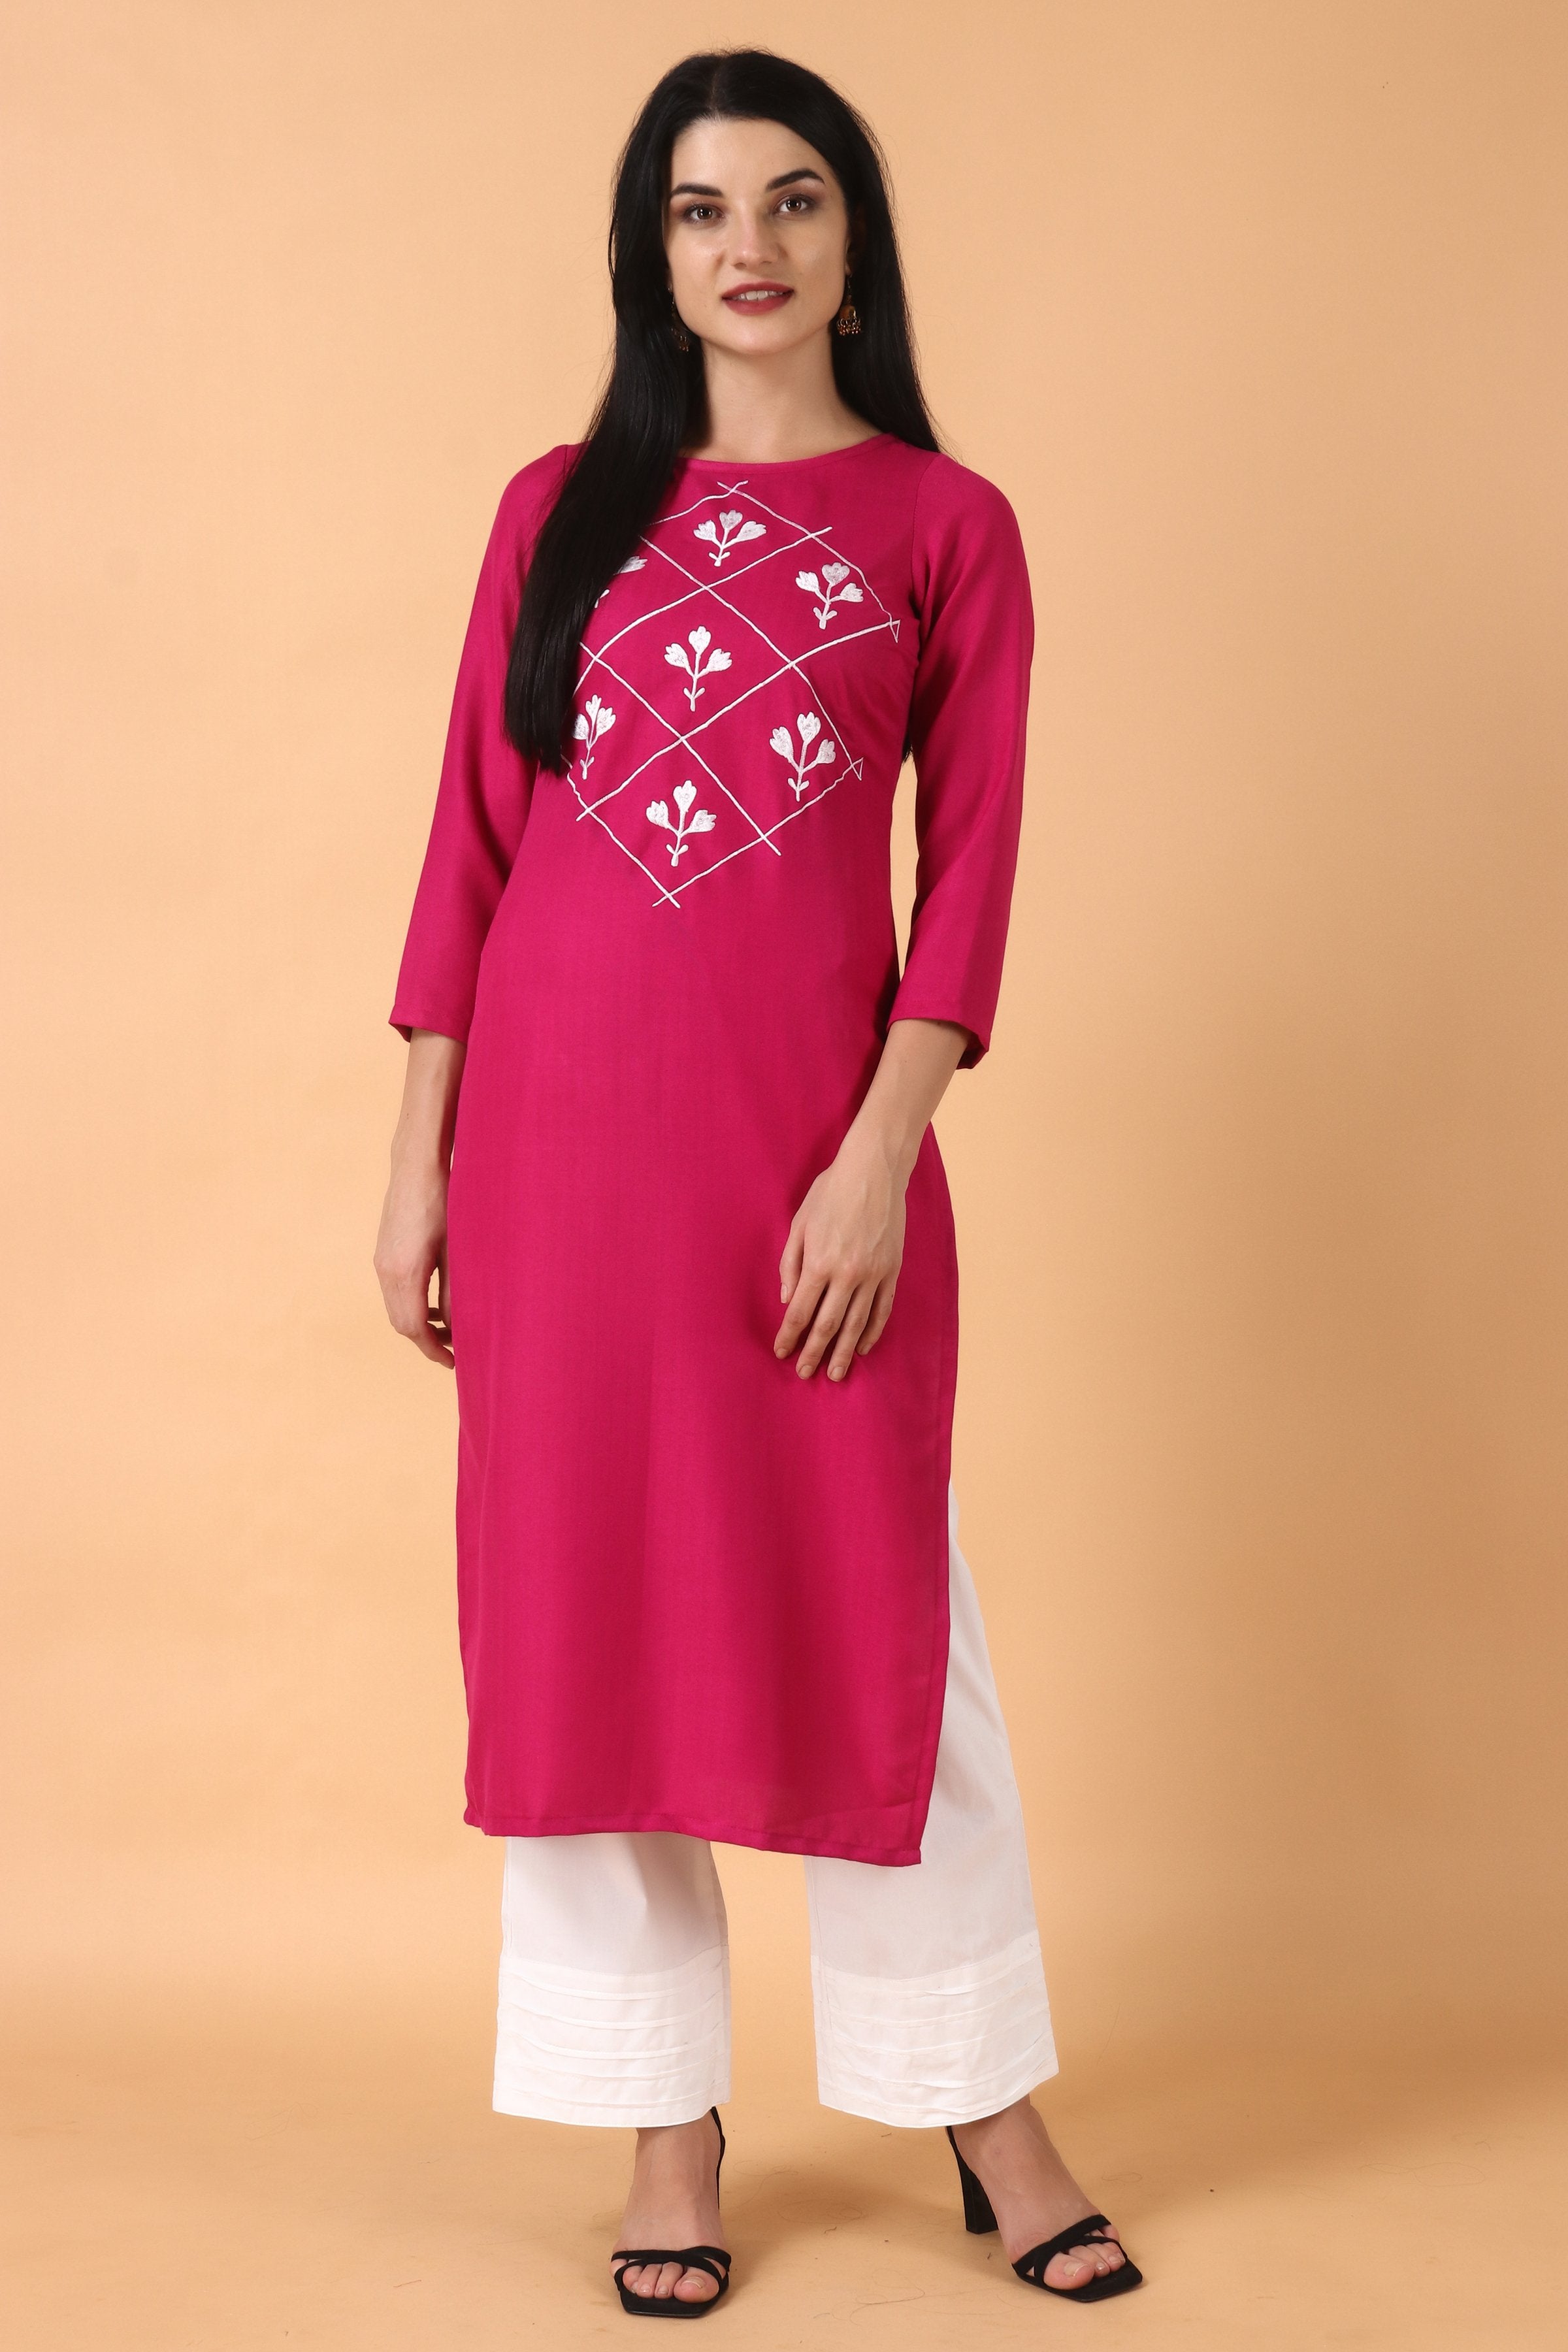 Buy Royal Rajasthani Kurti Women's & Girl's Beautiful Pink Color Printed  Kurta with Palazzo/Plazo for All ocassions at Amazon.in